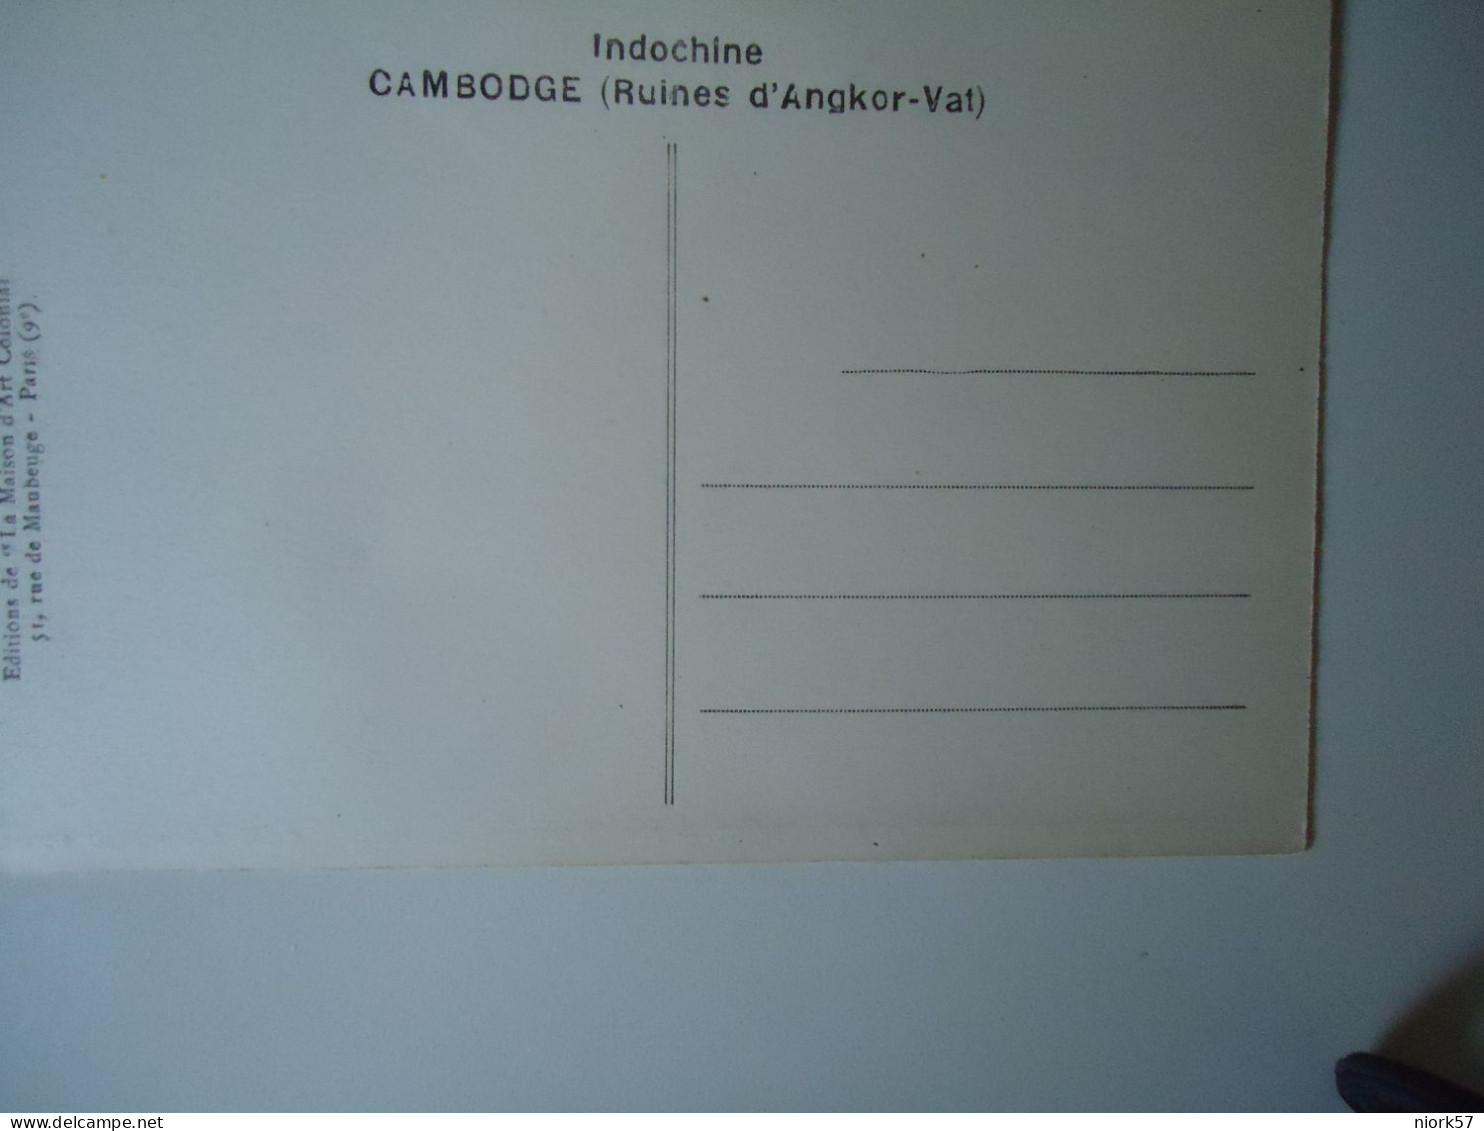 CAMBODIA   POSTCARD  ANGKOR VAT     FOR MORE PURCHASES 10% DISCOUNT - Cambogia